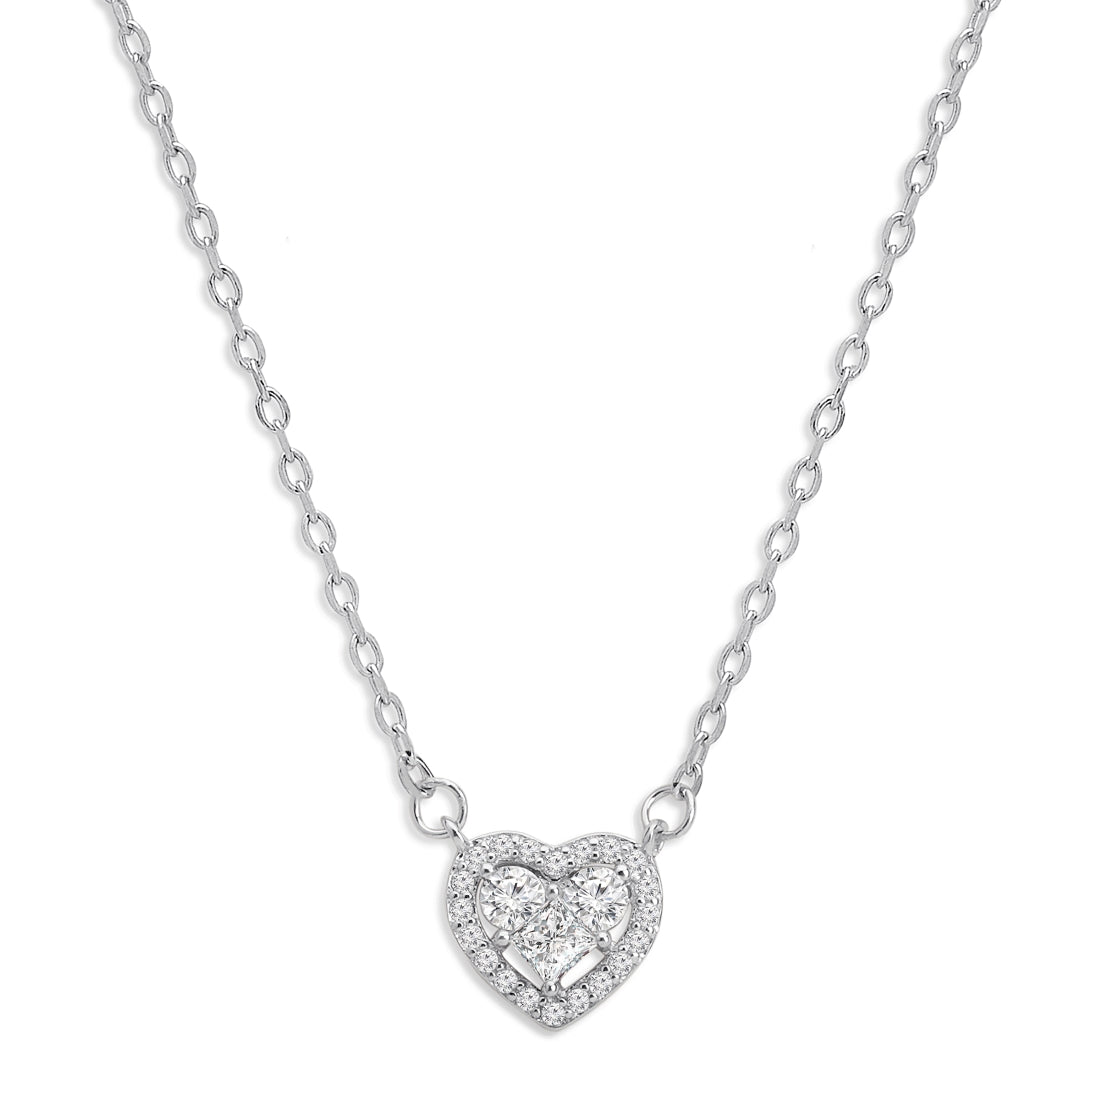 Heartfelt Radiance Rhodium Plated 925 Sterling Silver Necklace